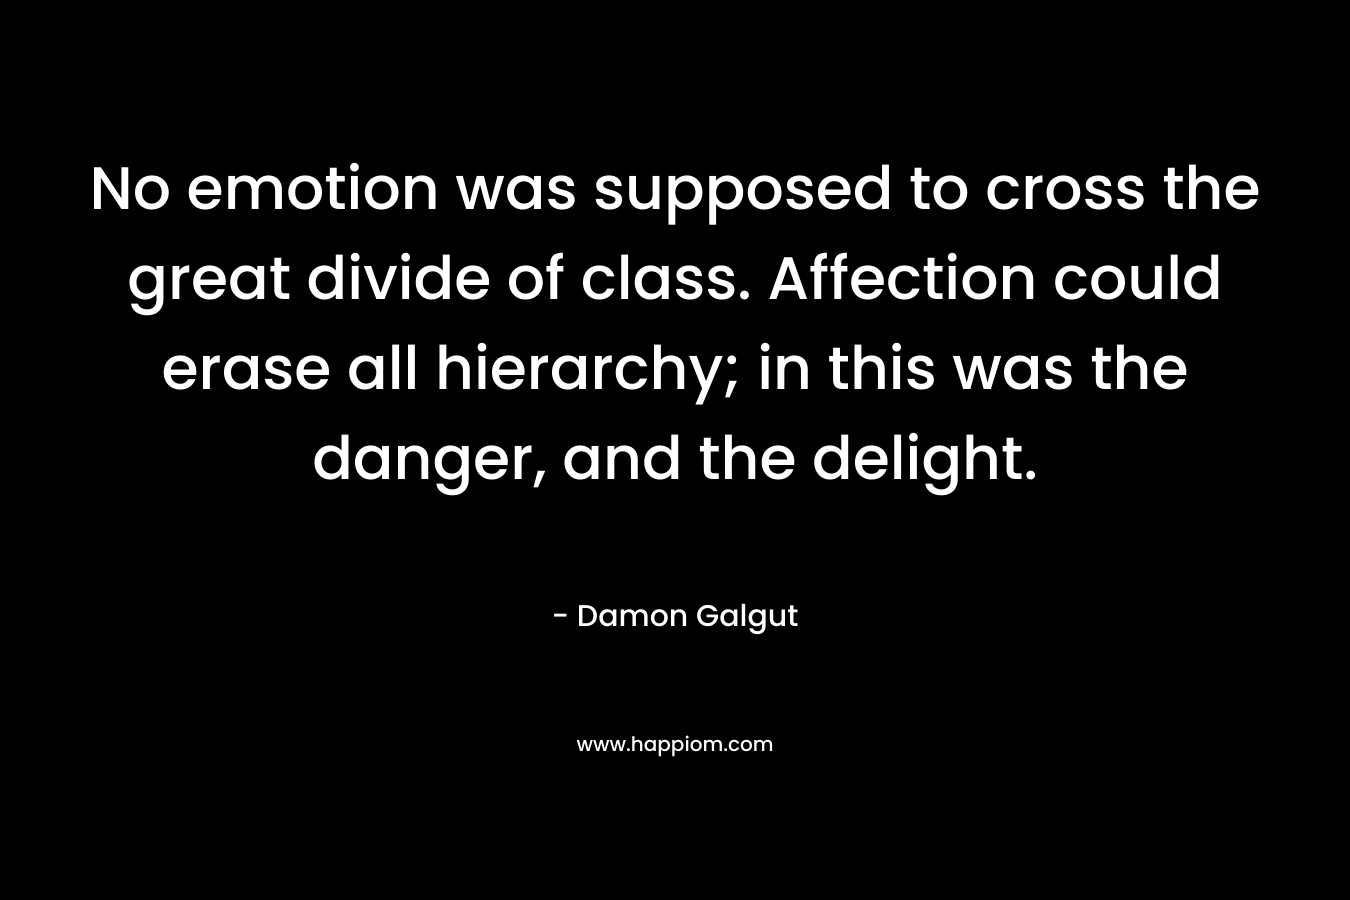 No emotion was supposed to cross the great divide of class. Affection could erase all hierarchy; in this was the danger, and the delight. – Damon Galgut